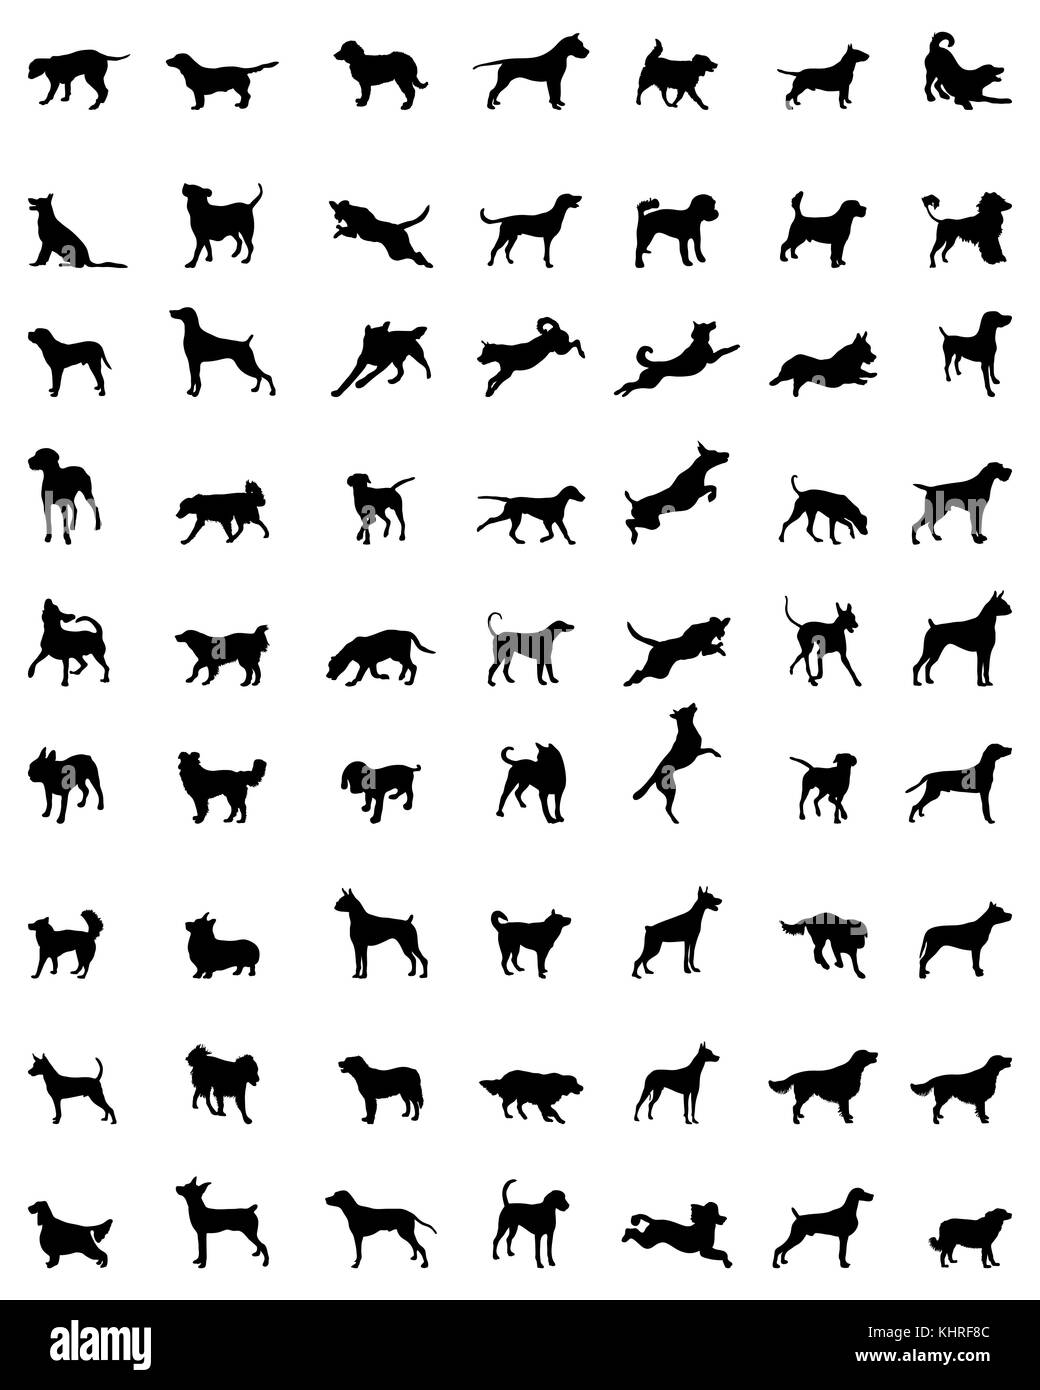 Black silhouettes of different races of dogs, vector Stock Photo